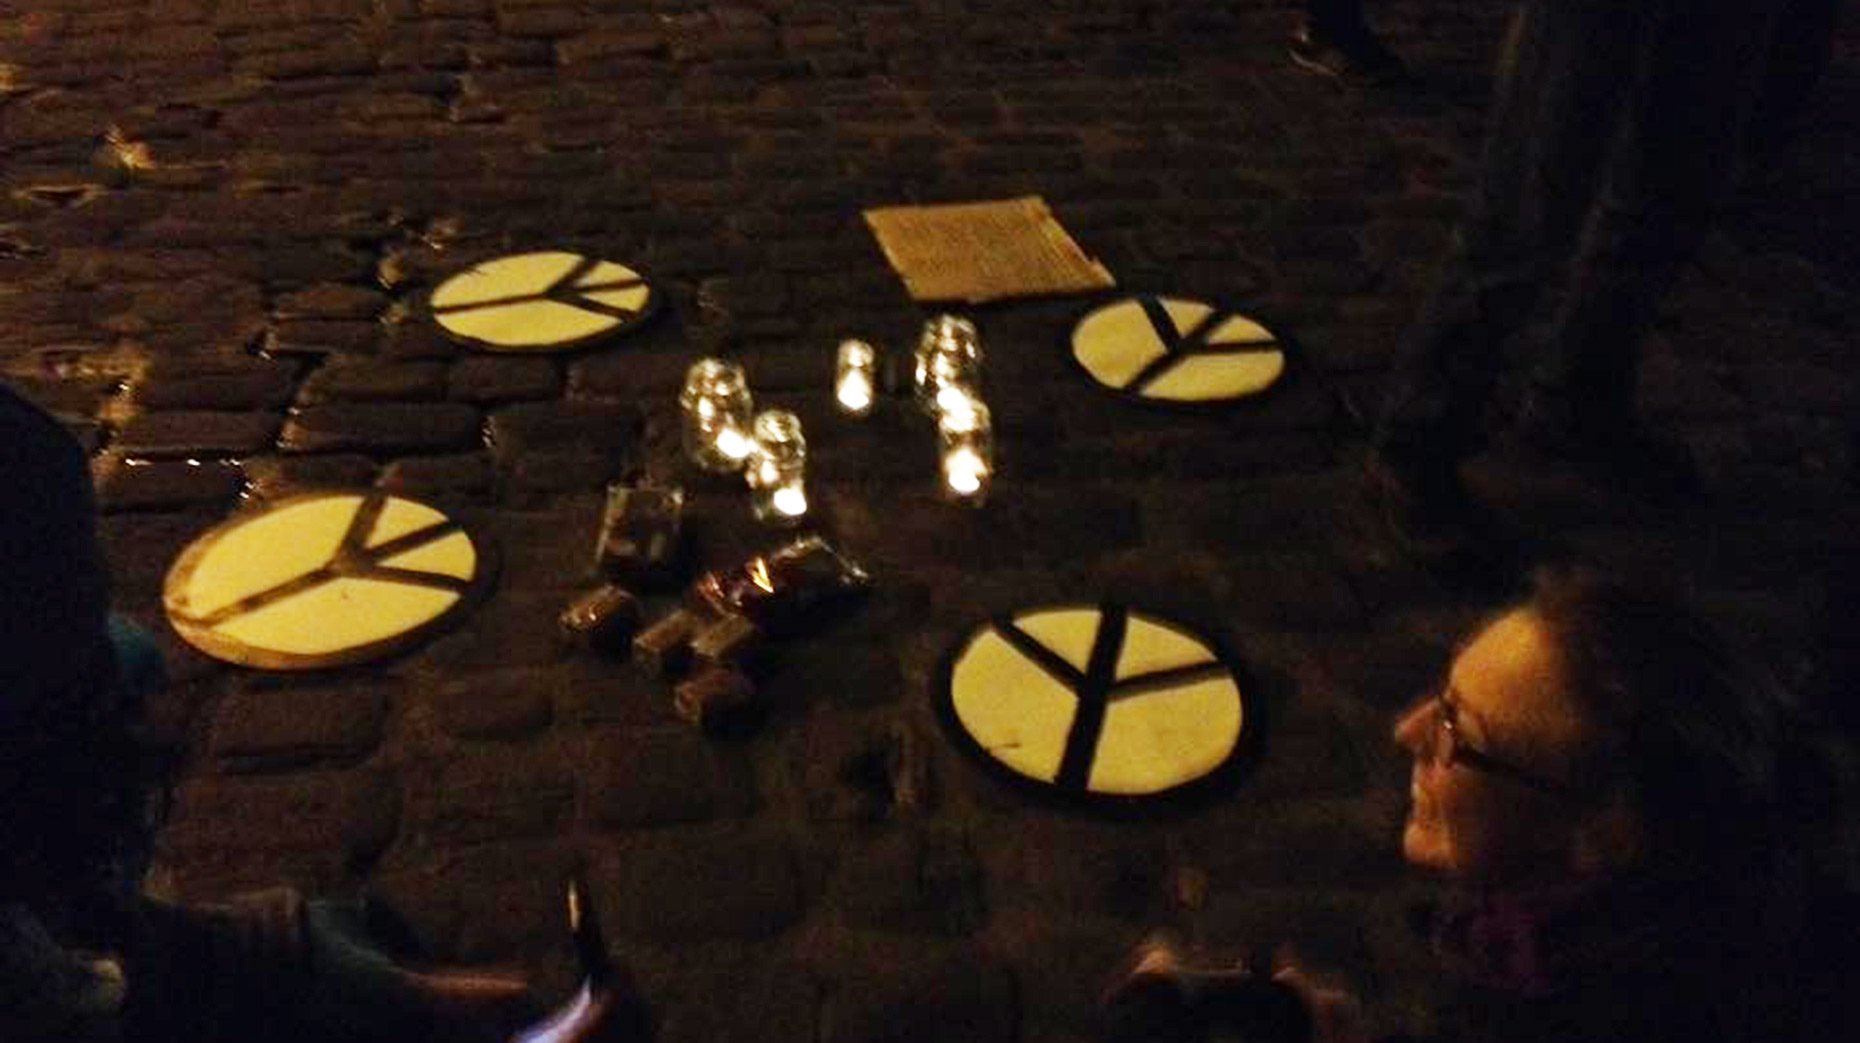 The group sat in a circle with candles and peace signs to discuss the presidential transition. 